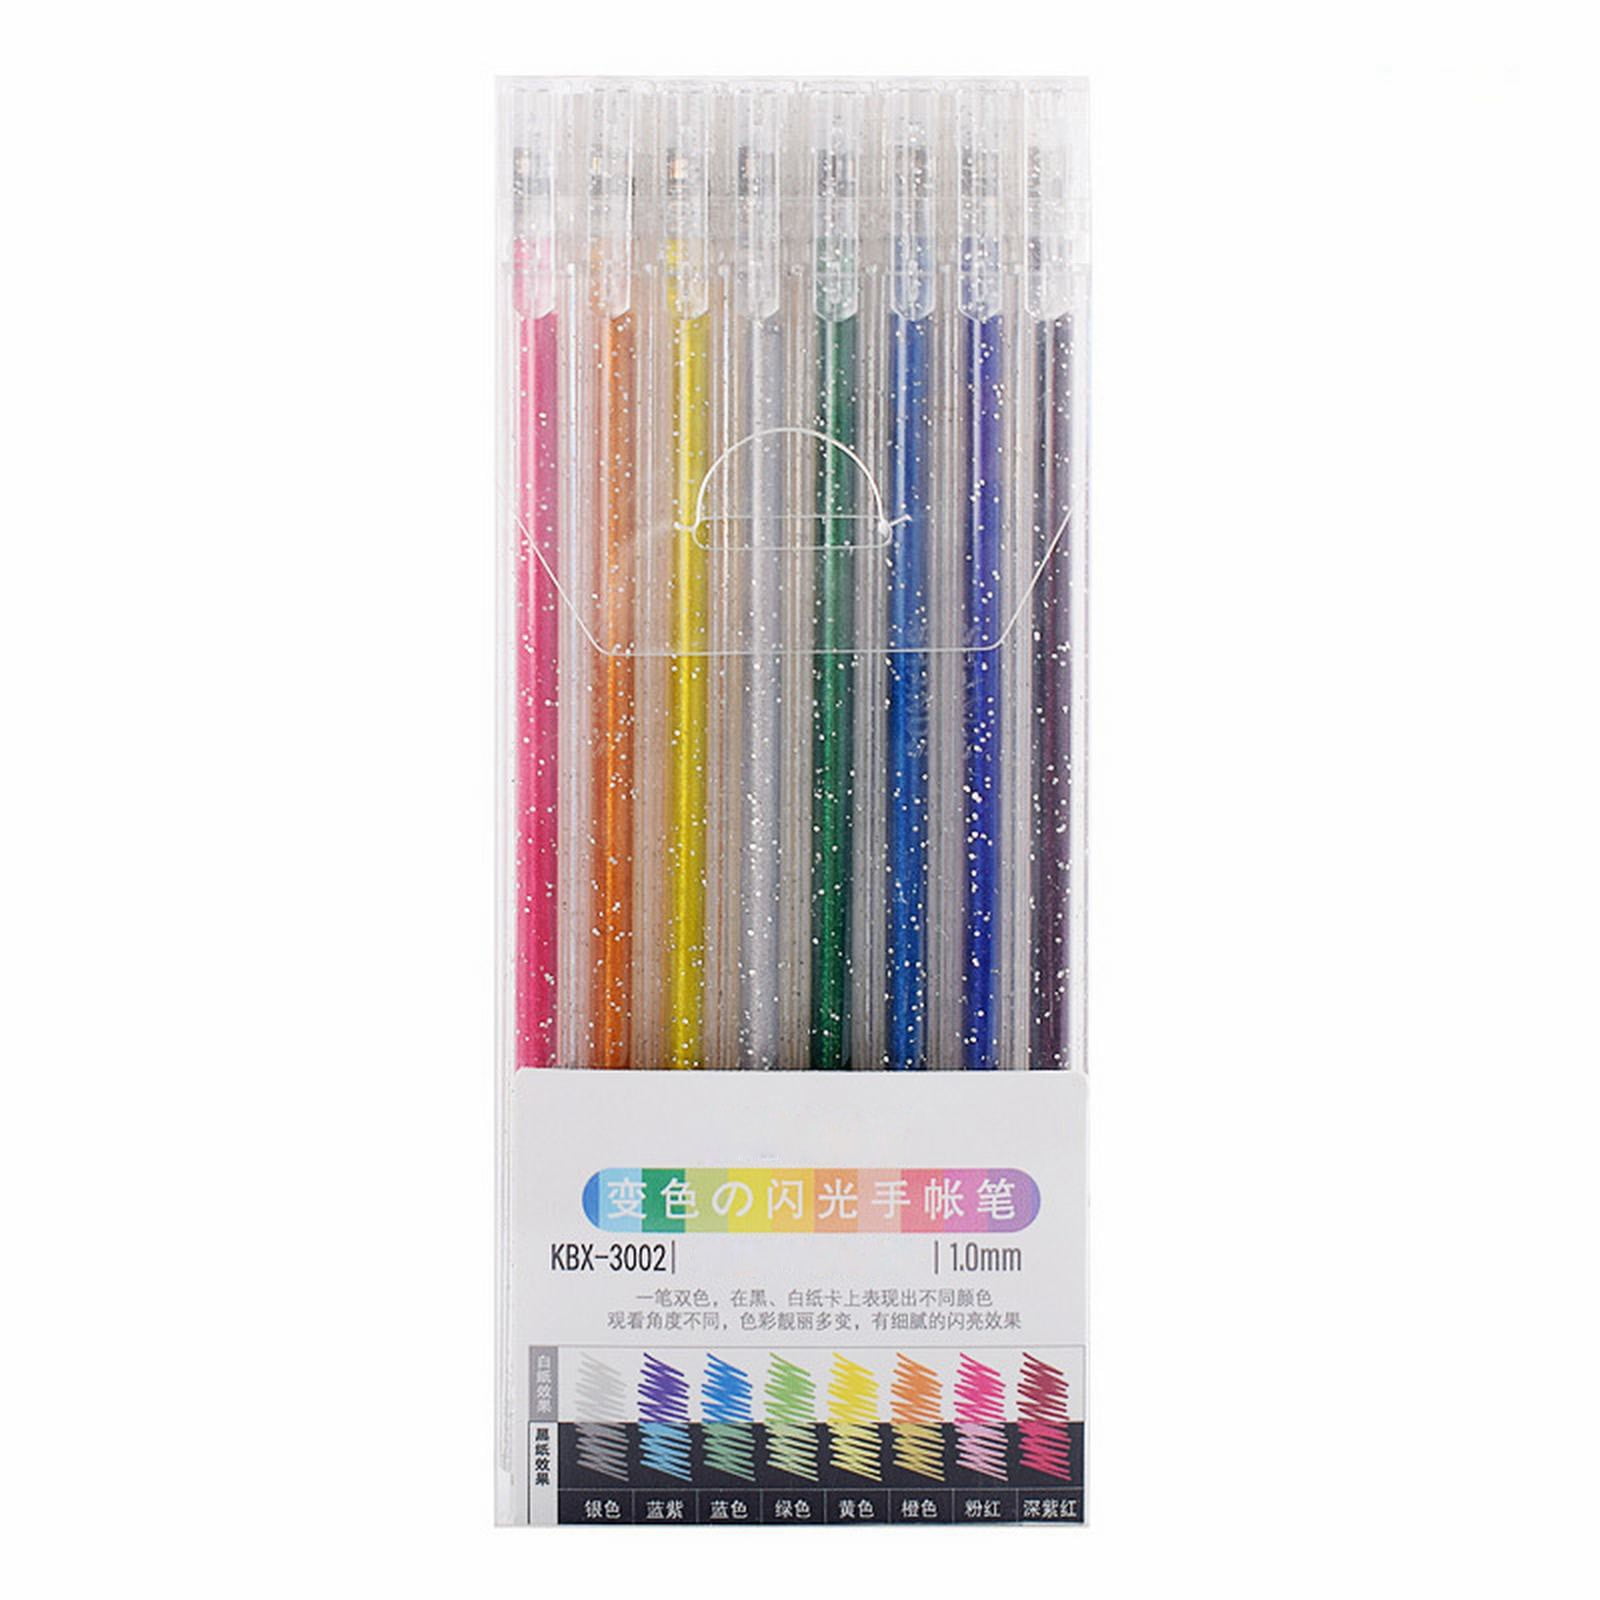 Drawing Marker Glitter Gel Pen Set With Colorful Flashing, Light Glow,  Liquid Sand, Color Changing And Fluorescent Properties - 12pcs